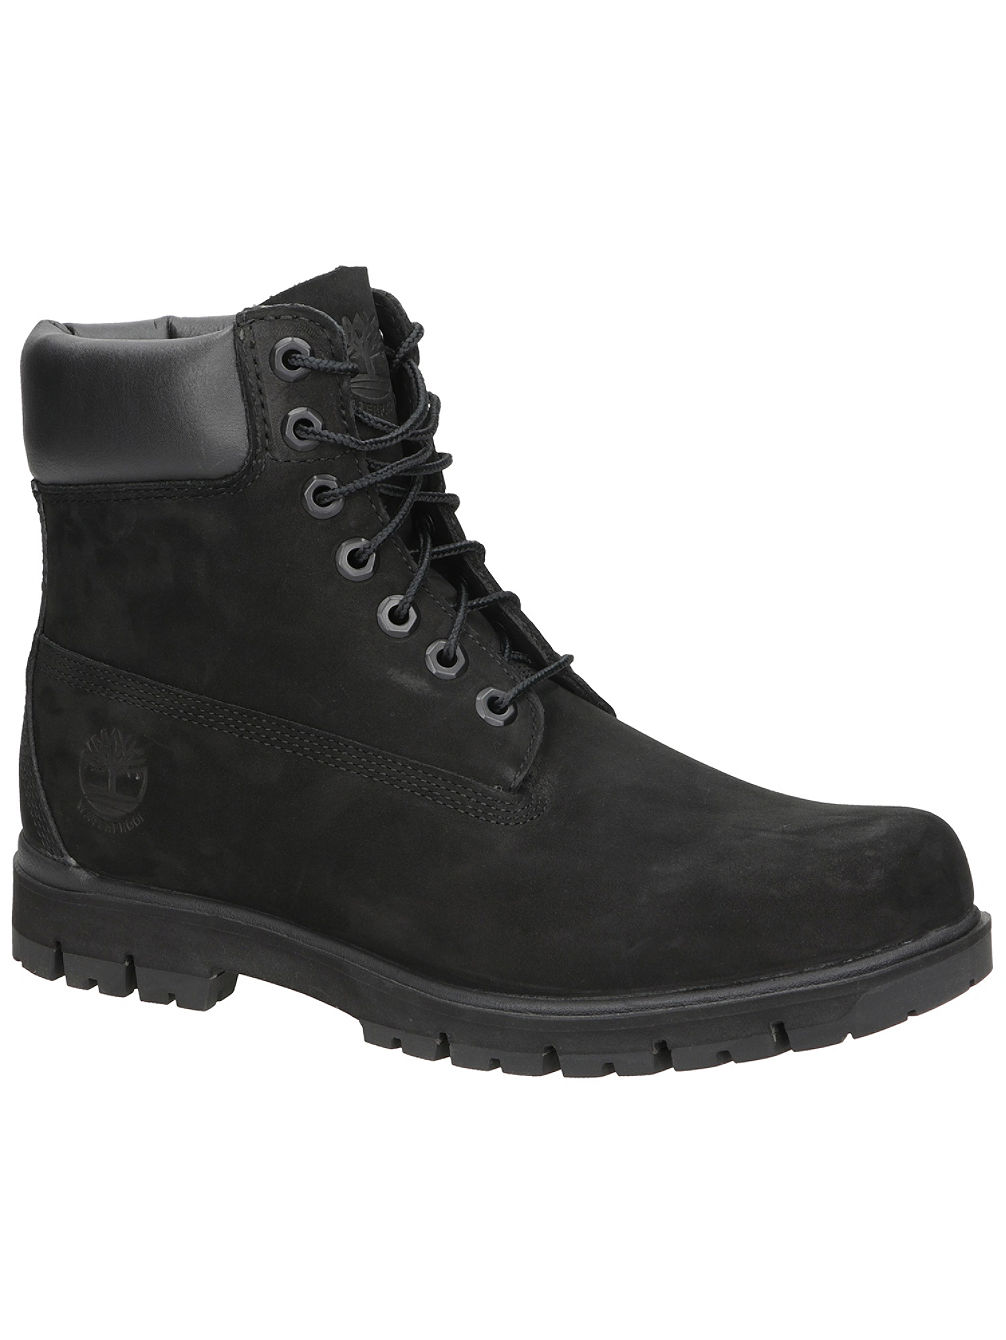 Radford 6&amp;#034; Boot Chaussures d&amp;#039;hiver